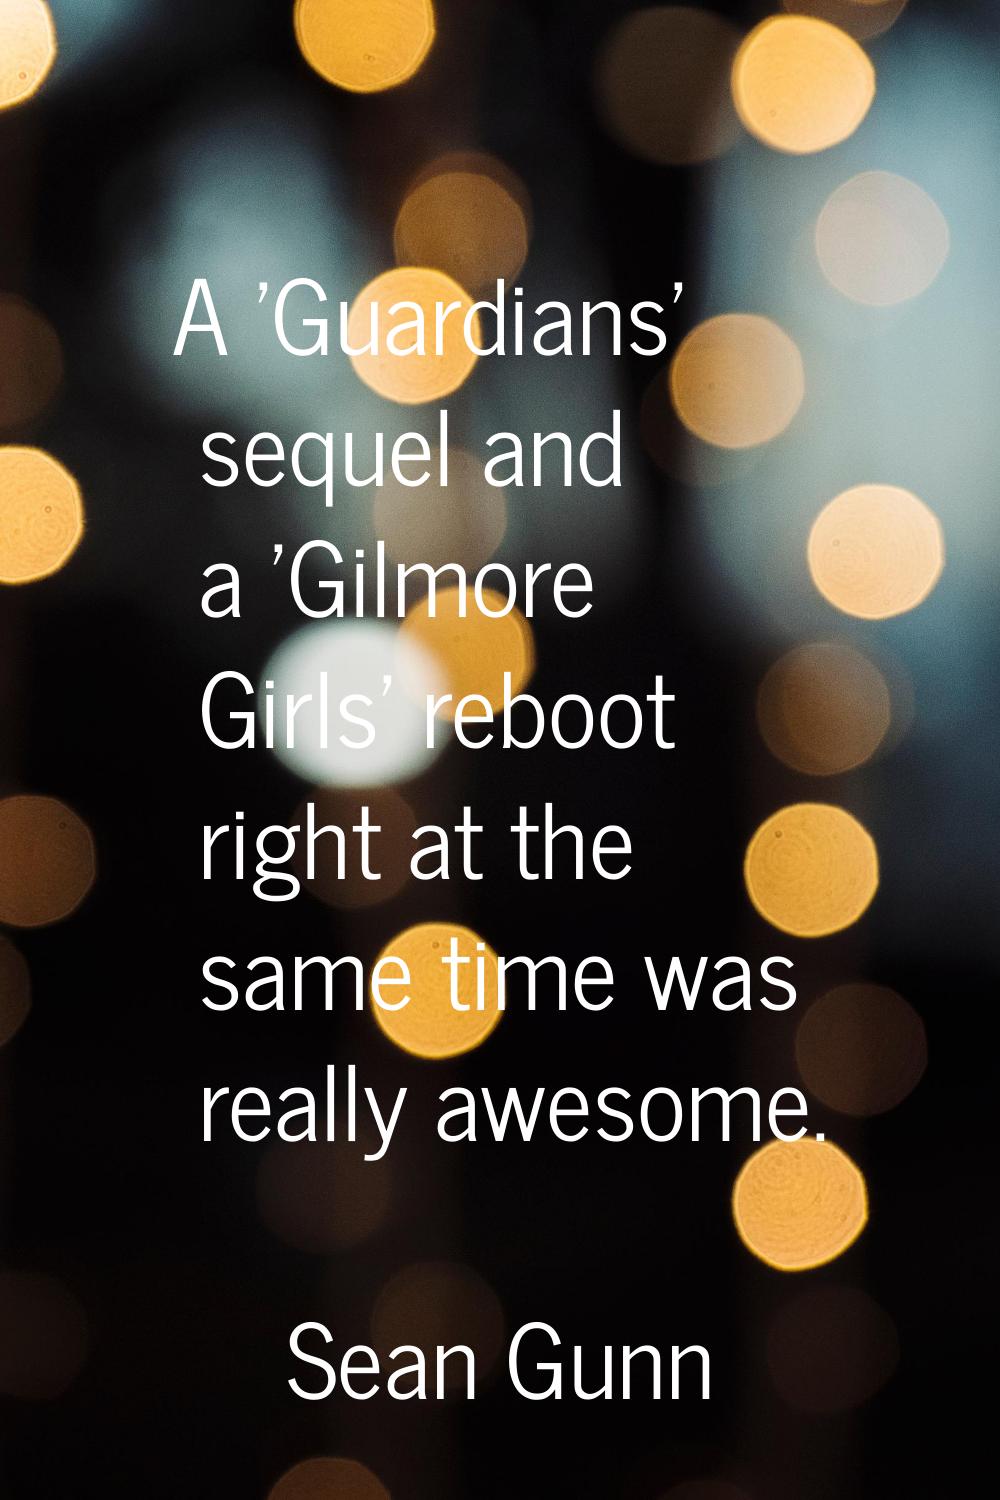 A 'Guardians' sequel and a 'Gilmore Girls' reboot right at the same time was really awesome.